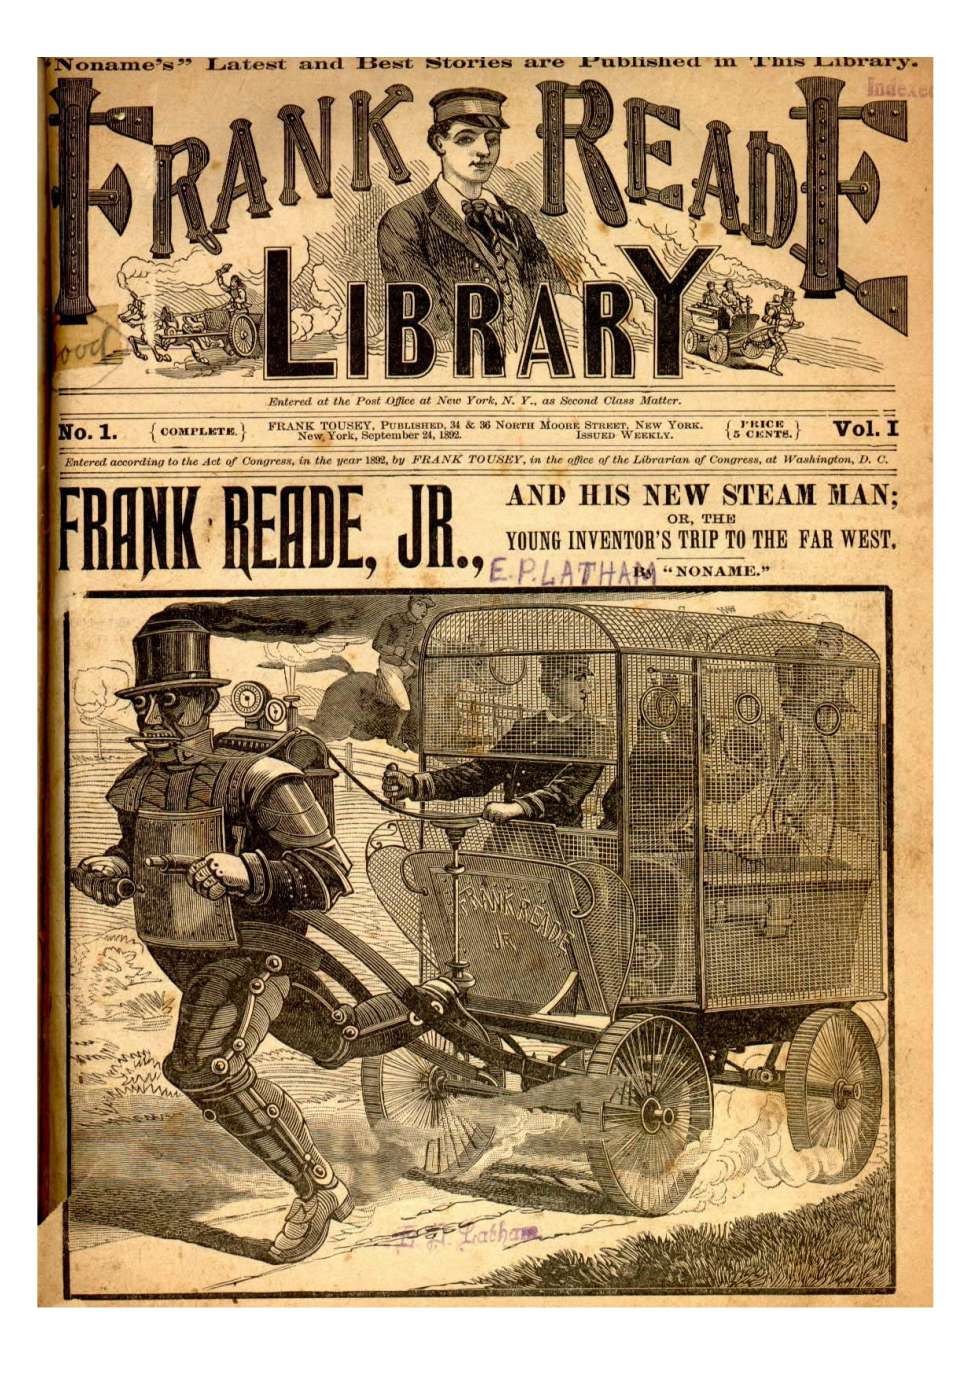 Comic Book Cover For v01 1 - Frank Reade Jr. and His New Steam Man (alt)